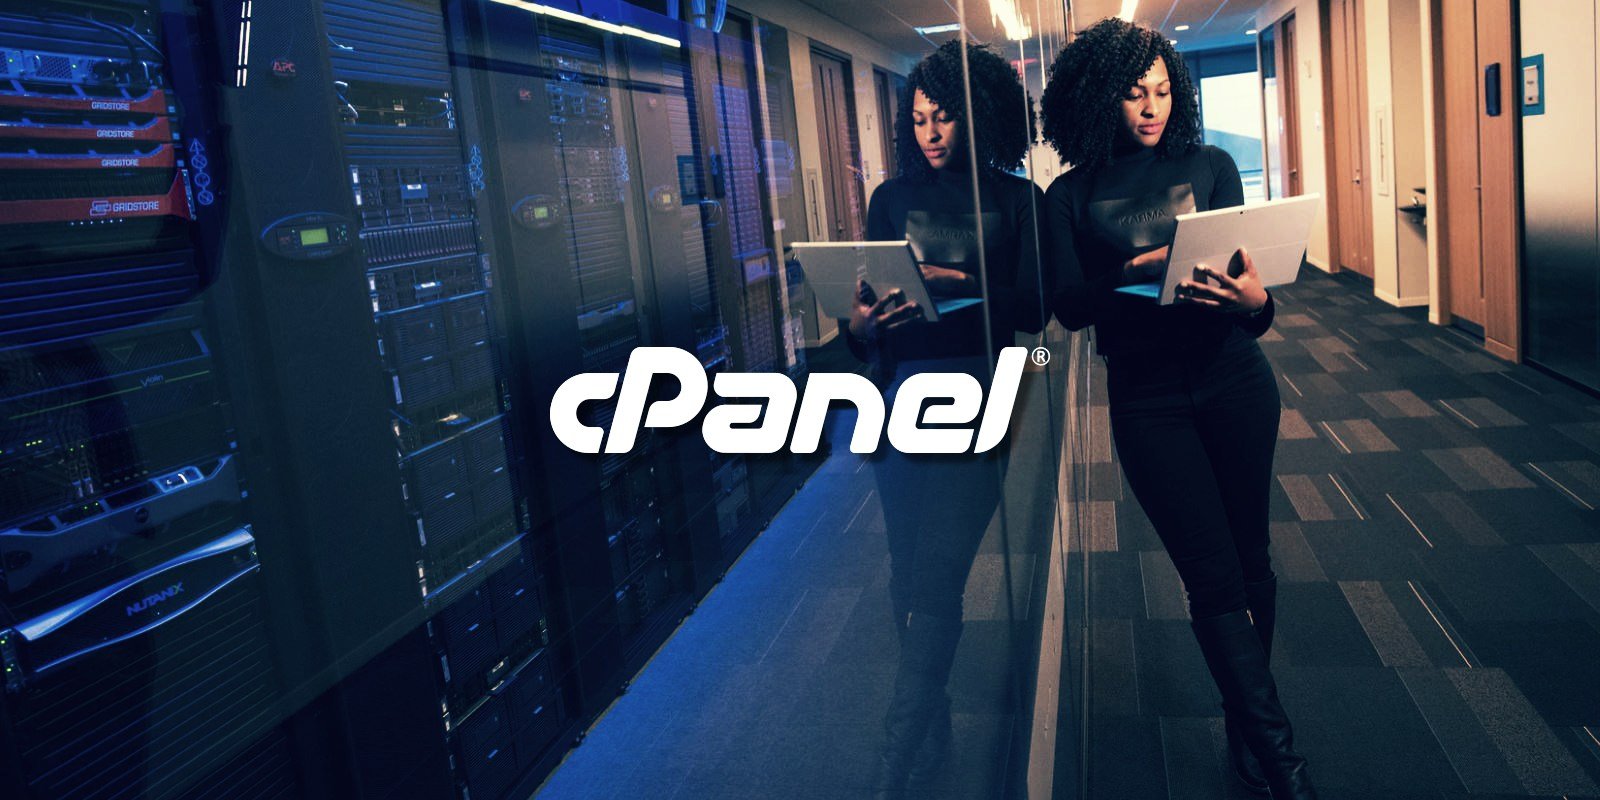 cPanel 2FA bypassed in minutes via brute-force attacks